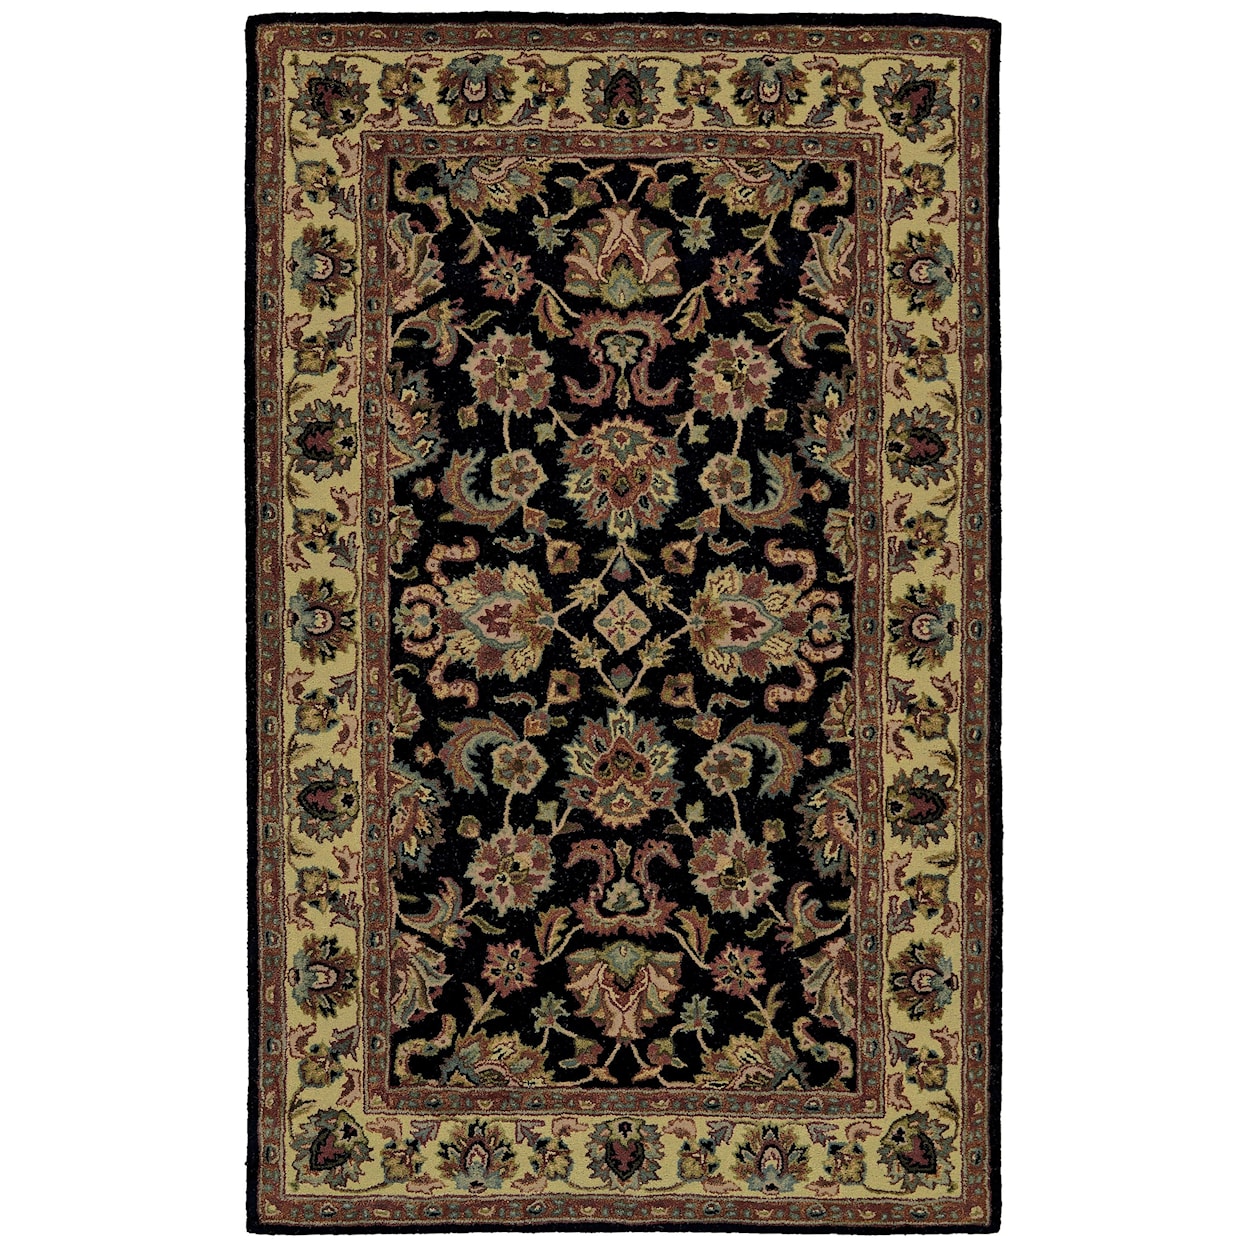 Feizy Rugs Yale Black/Gold 8' x 8' Round Area Rug